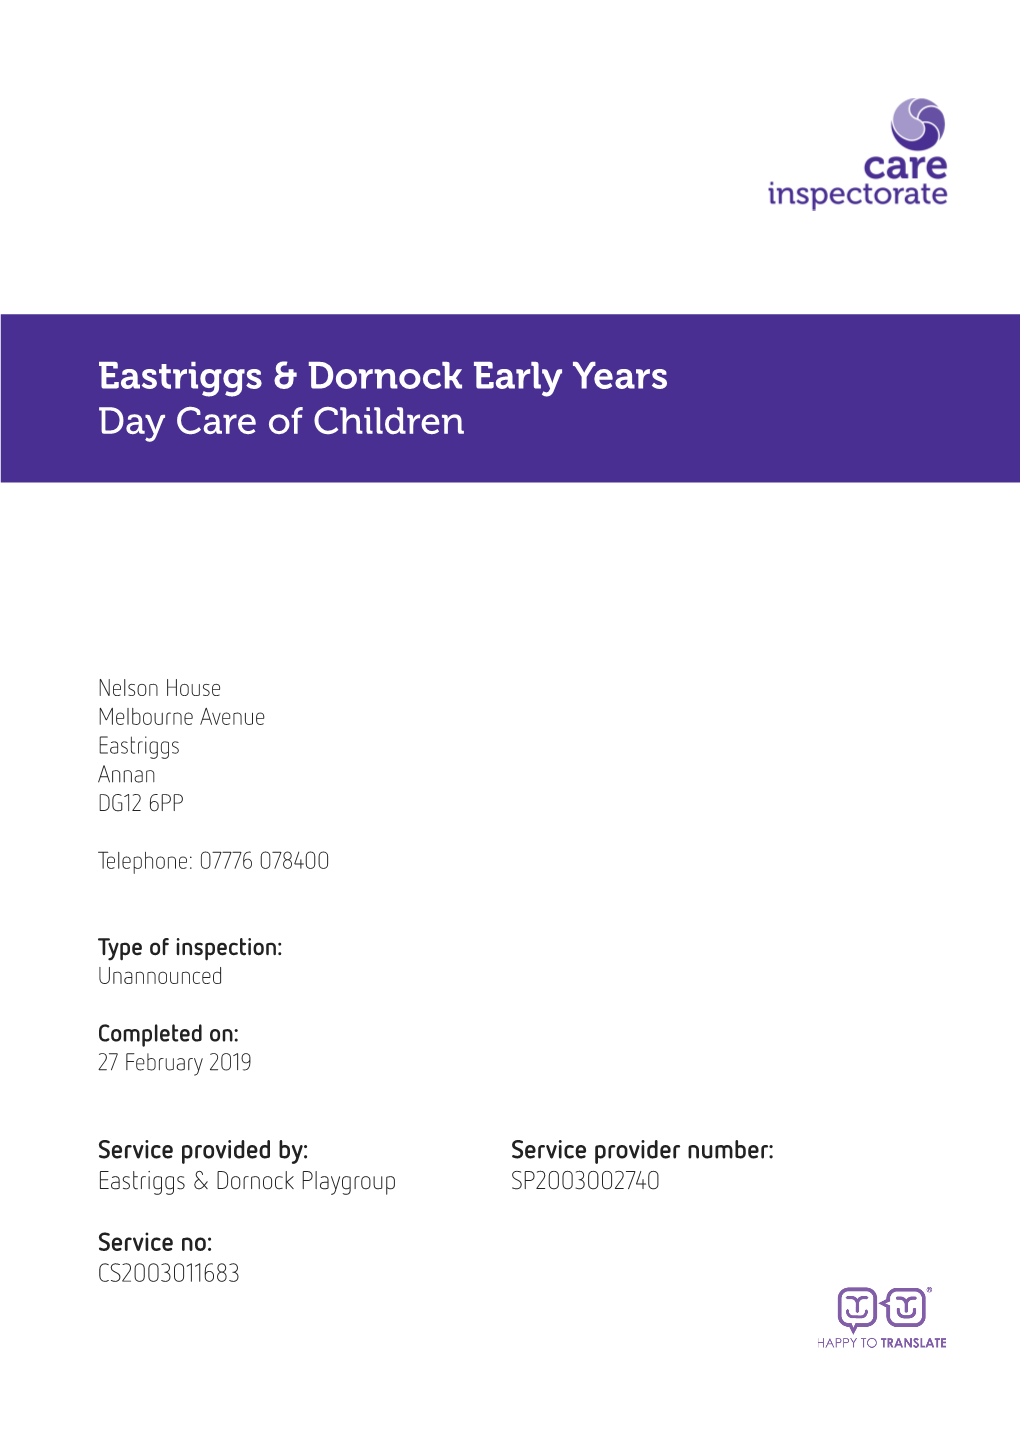 Eastriggs & Dornock Early Years Day Care of Children